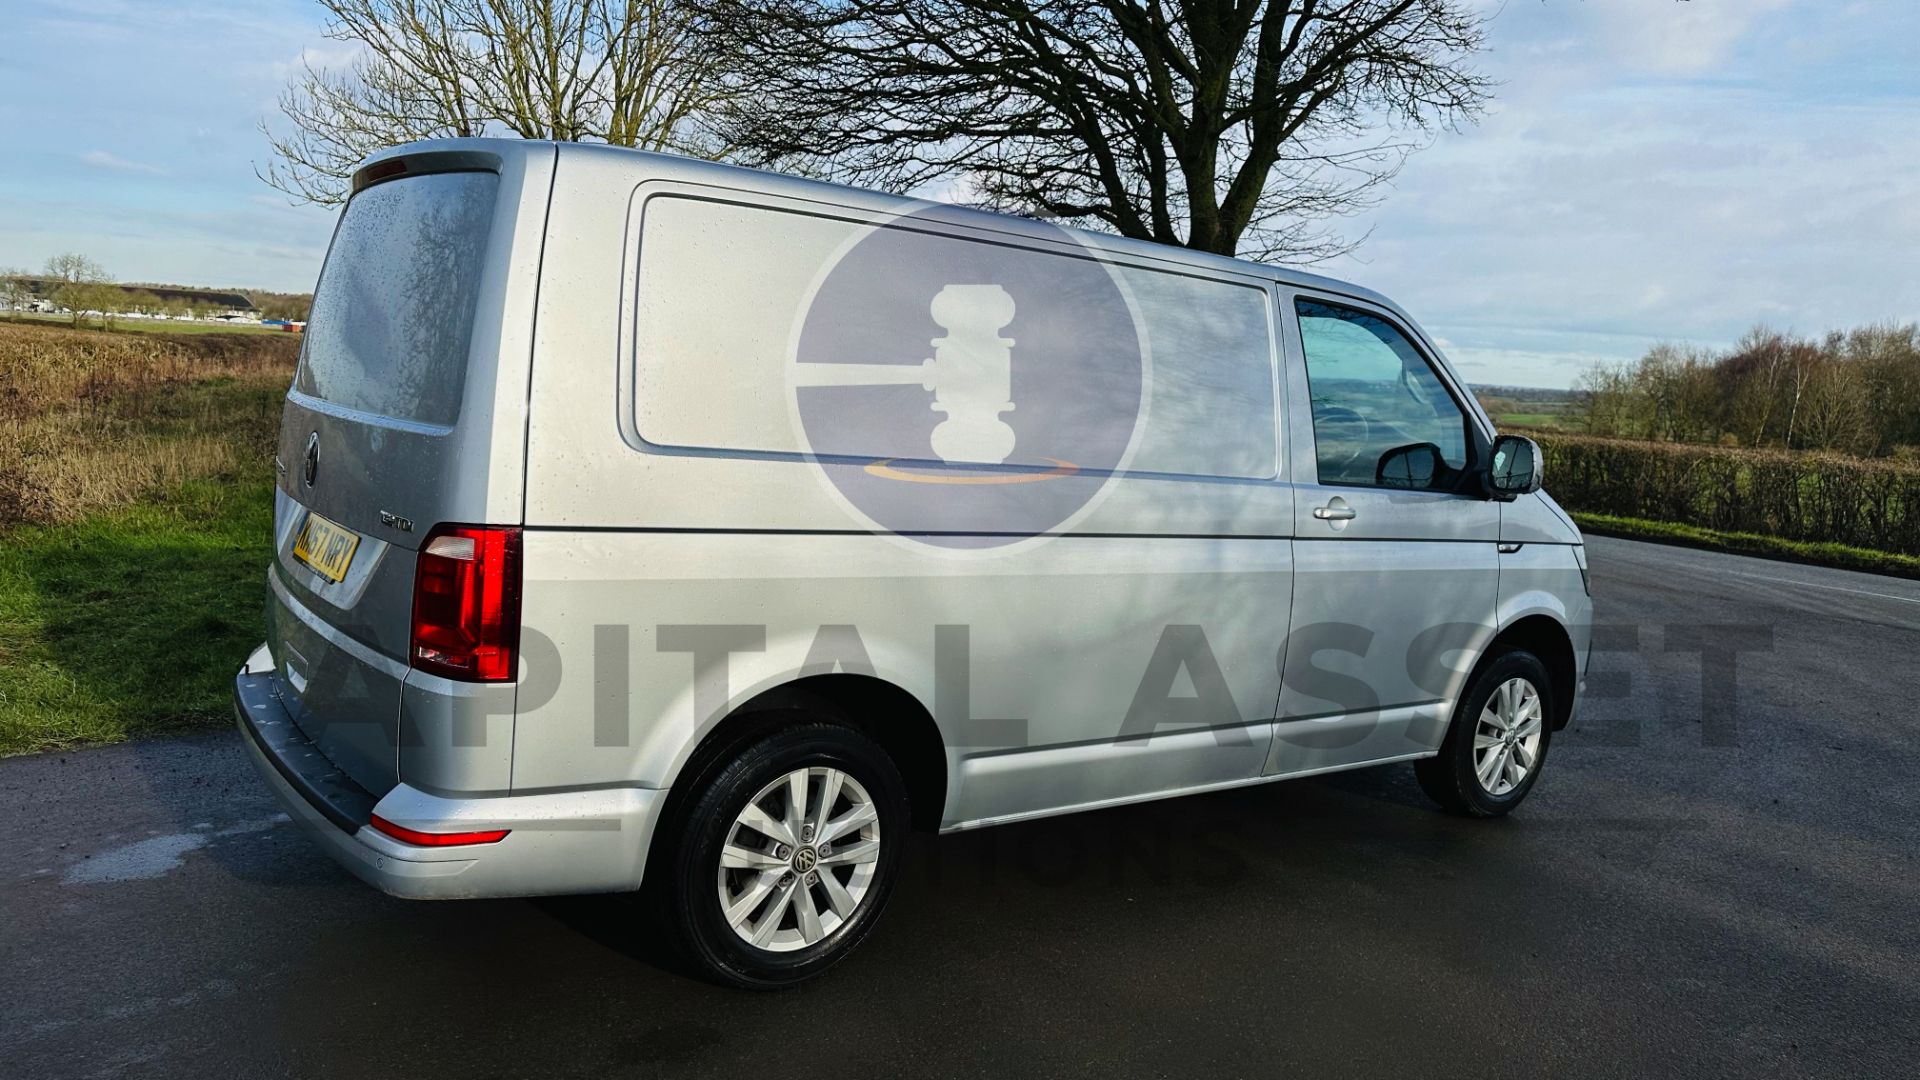 (On Sale) VOLKSWAGEN TRANSPORTER T30 *HIGHLINE EDITION* (67 REG - EURO 6) AUTO STOP/START *AIR CON* - Image 9 of 46